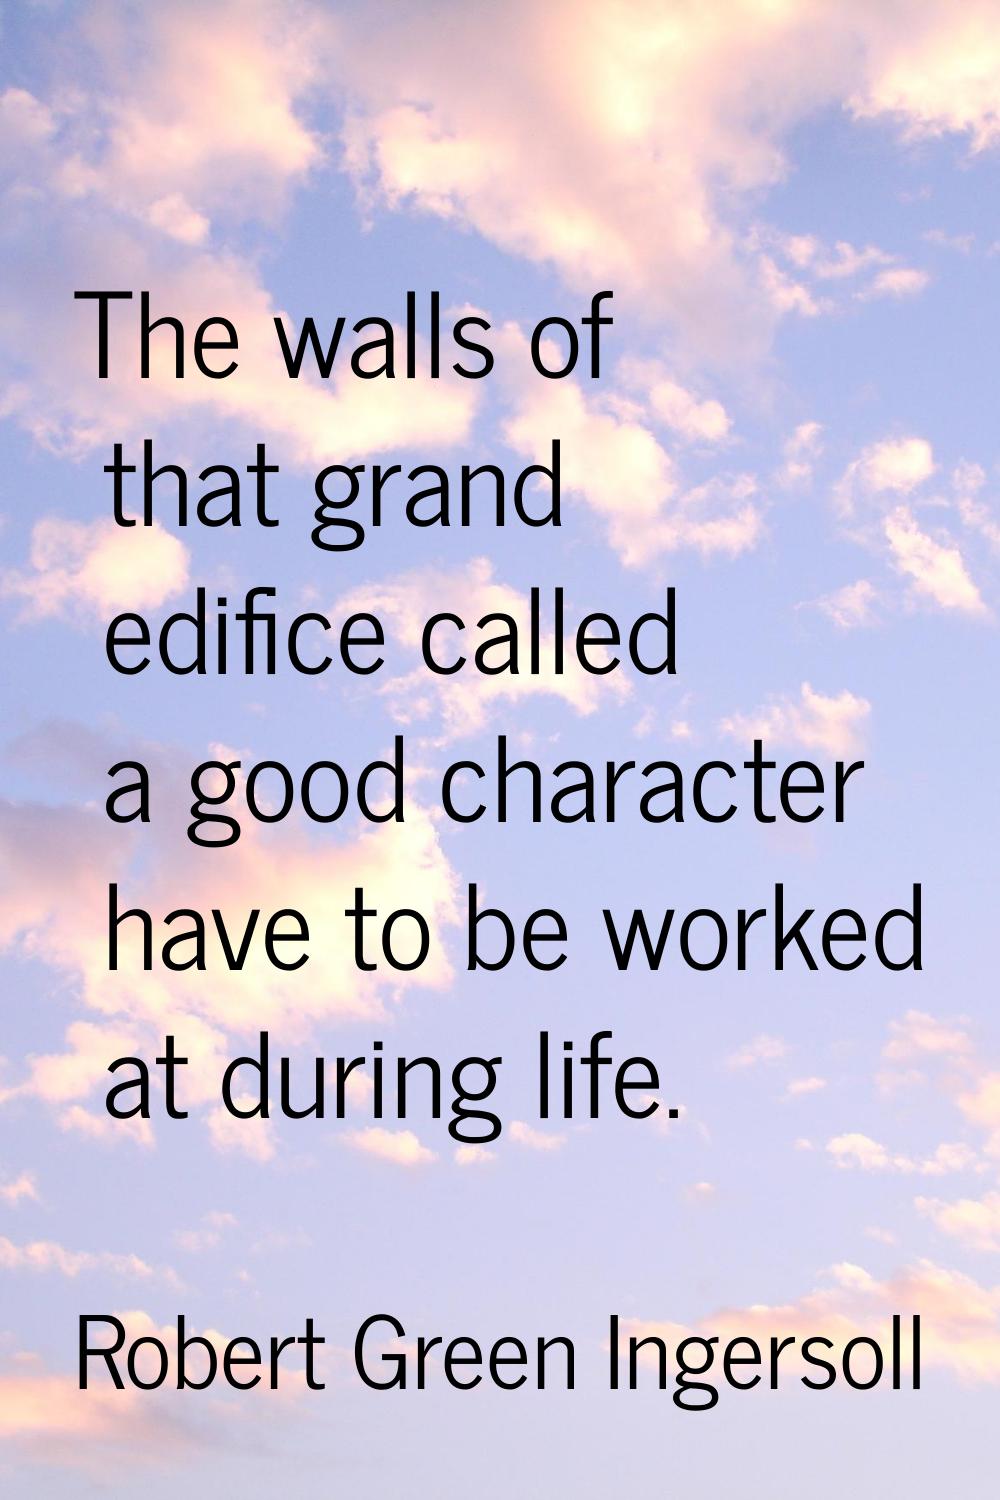 The walls of that grand edifice called a good character have to be worked at during life.